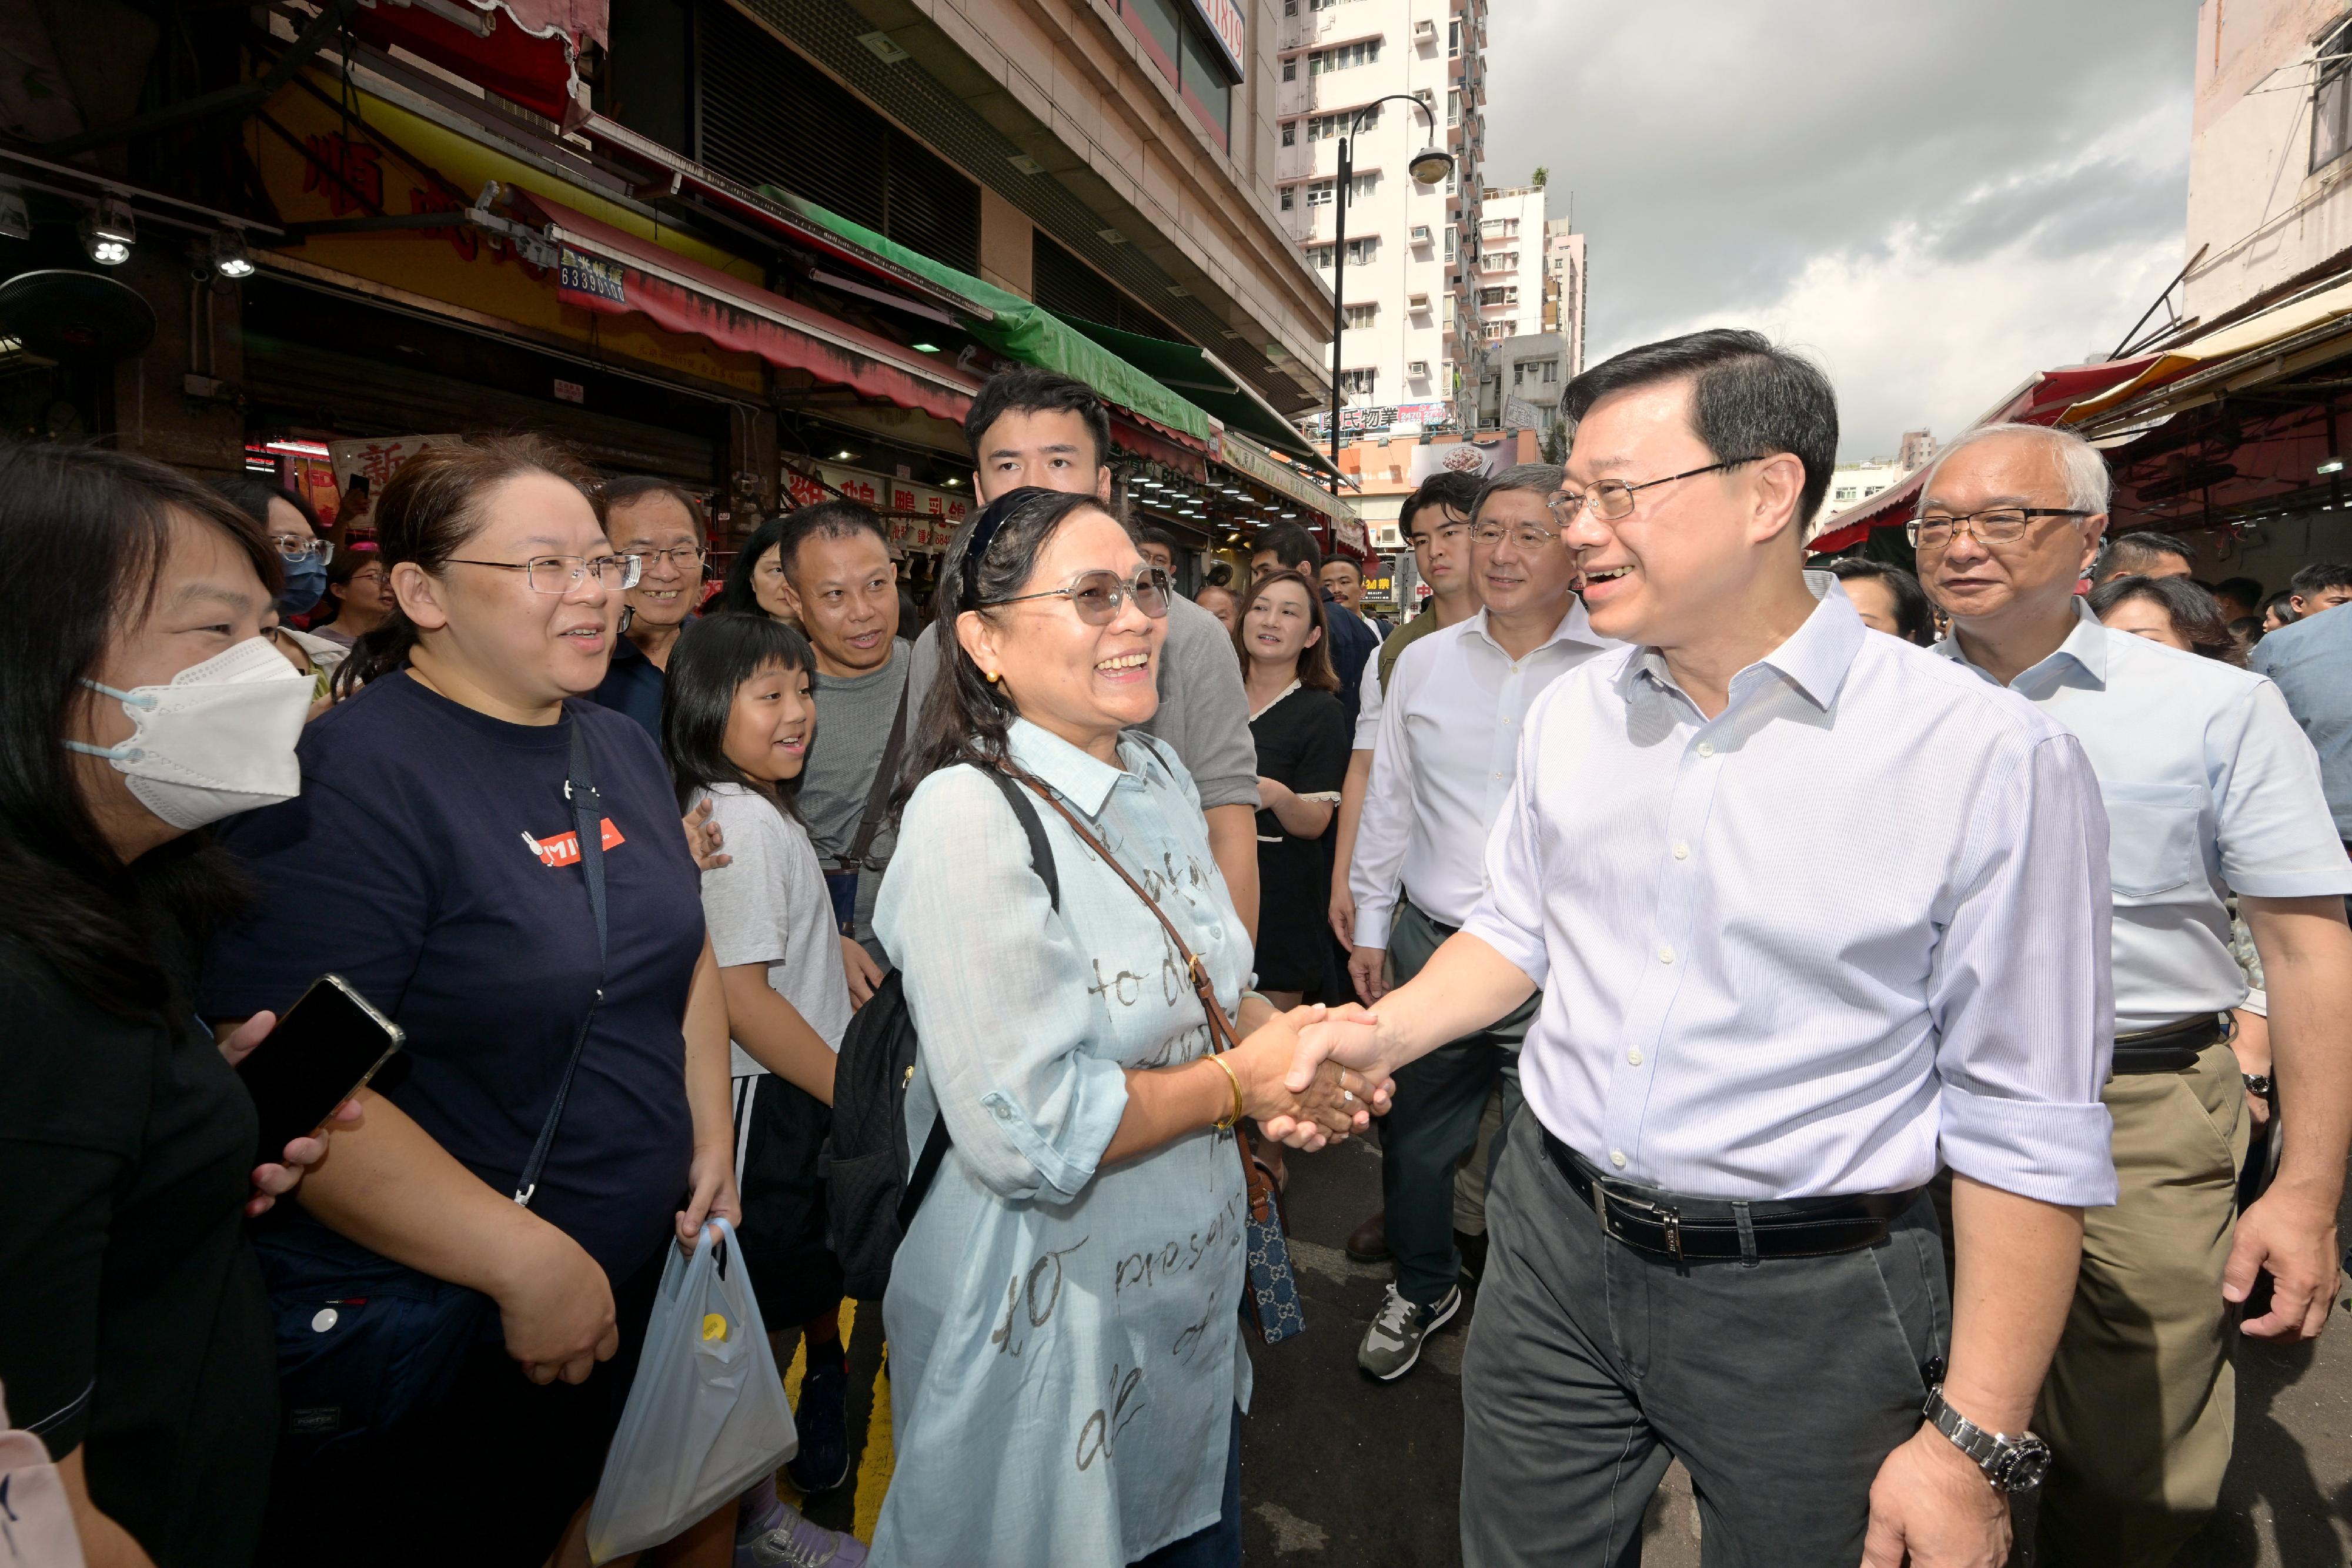 The Chief Executive, Mr John Lee, visited Yuen Long to gather public views on the upcoming Policy Address today (September 17). Photo shows Mr Lee (second right), accompanied by the Deputy Chief Secretary for Administration, Mr Cheuk Wing-hing (third right), and the Secretary for Environment and Ecology, Mr Tse Chin-wan (first right), interacting with members of the public in the district.